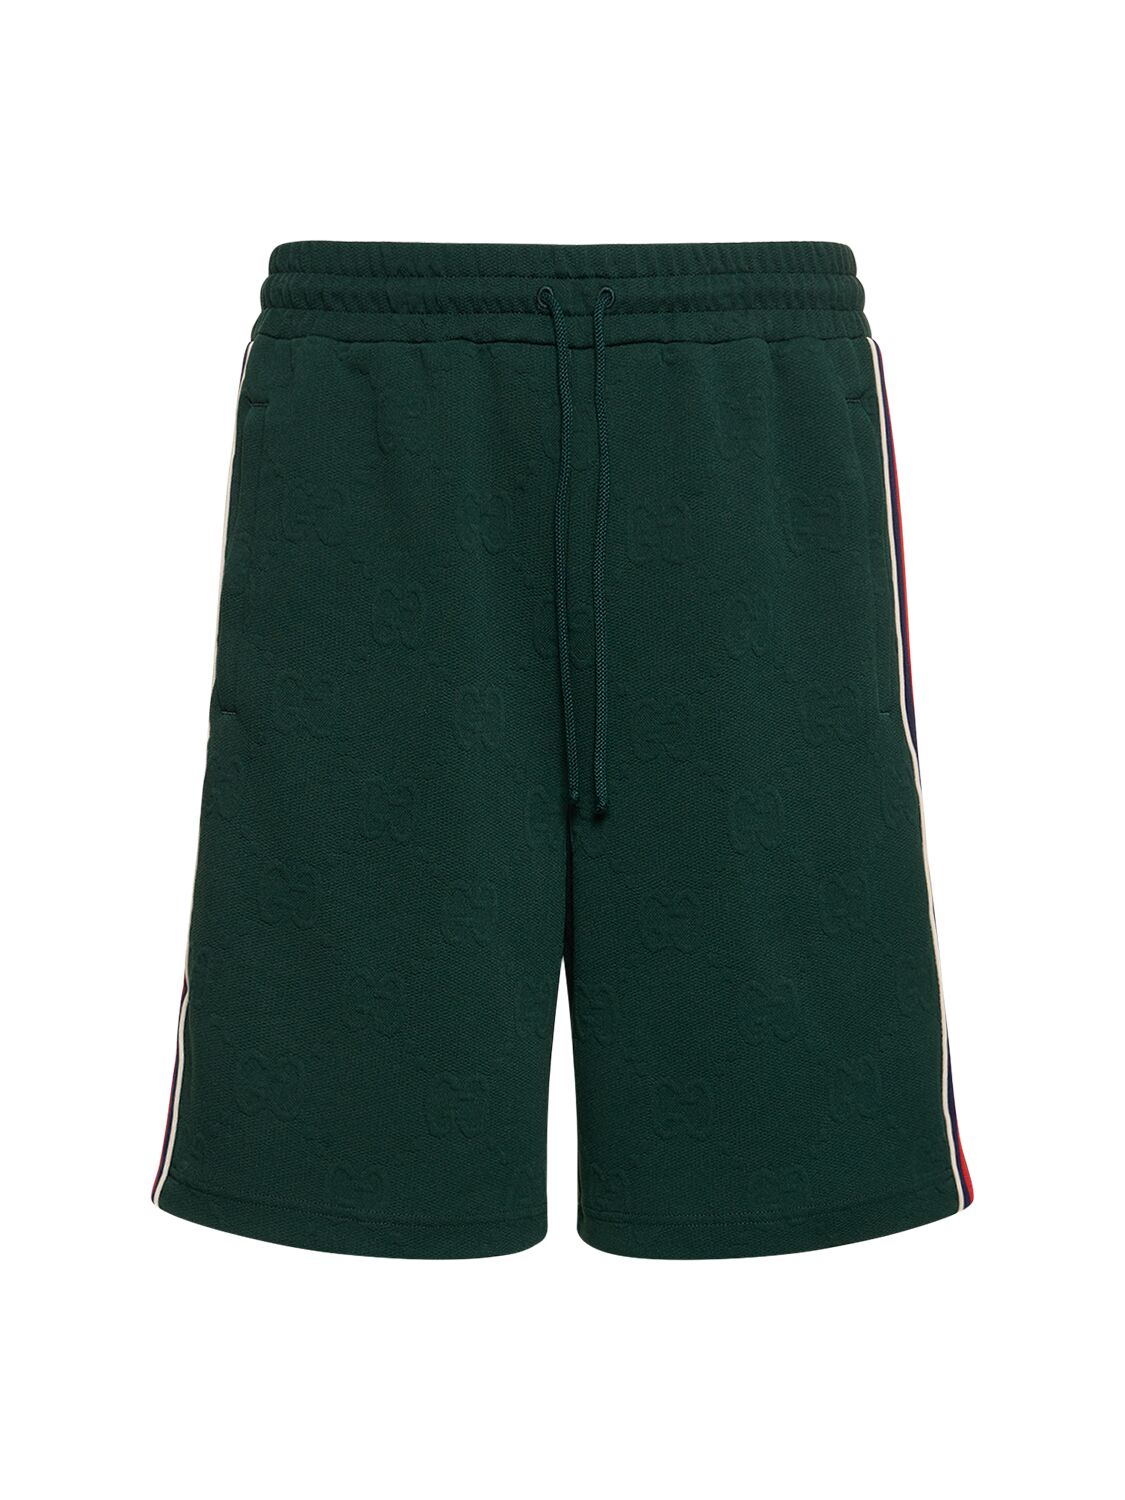 Gucci Iconic Gg Tech Shorts In Bottle Green